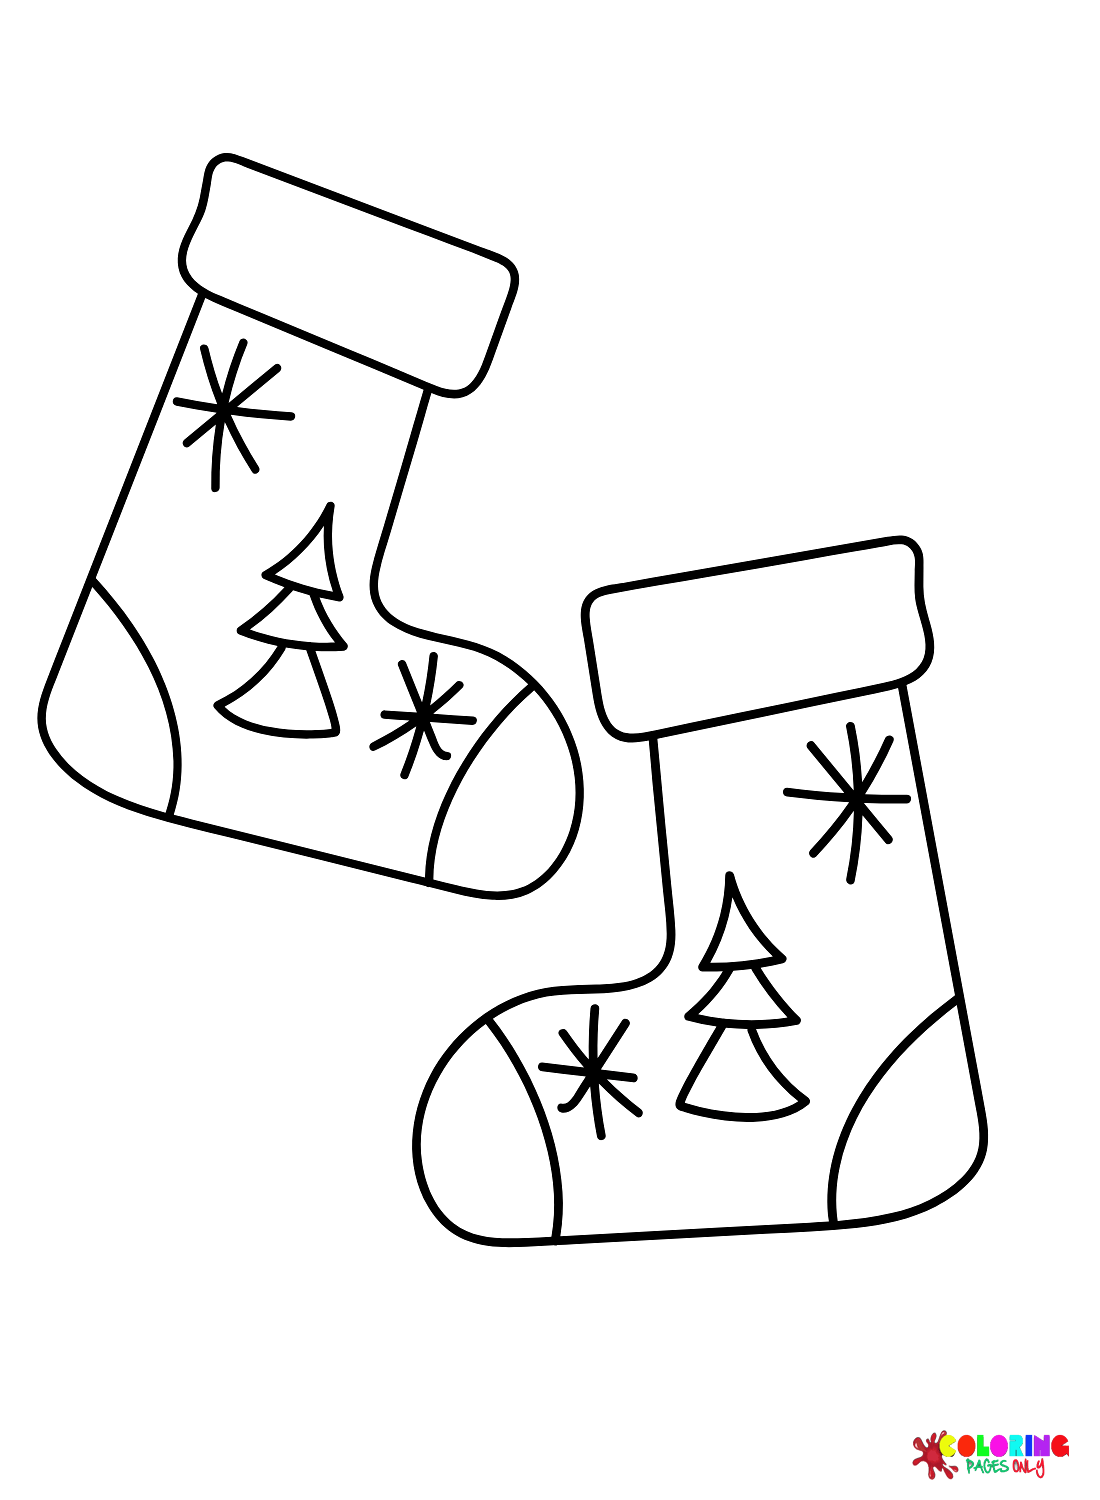 Socks Free Coloring Page - Free Printable Coloring Pages